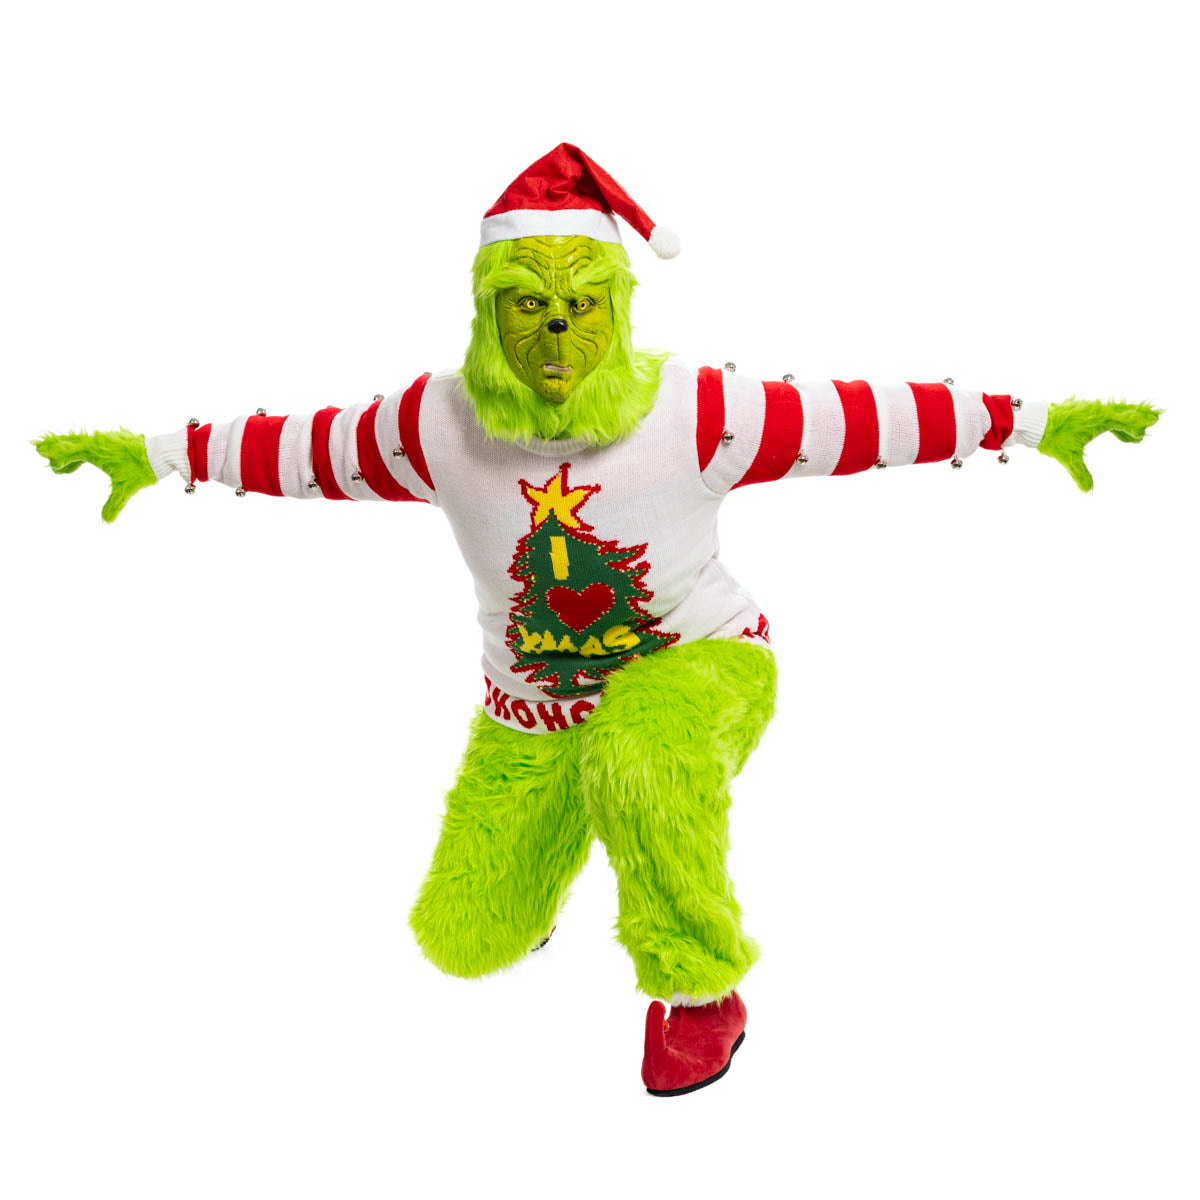 Grinch Christmas Shoes Get Festive with Red Shoes and Bells for Halloween Costume Cosplay